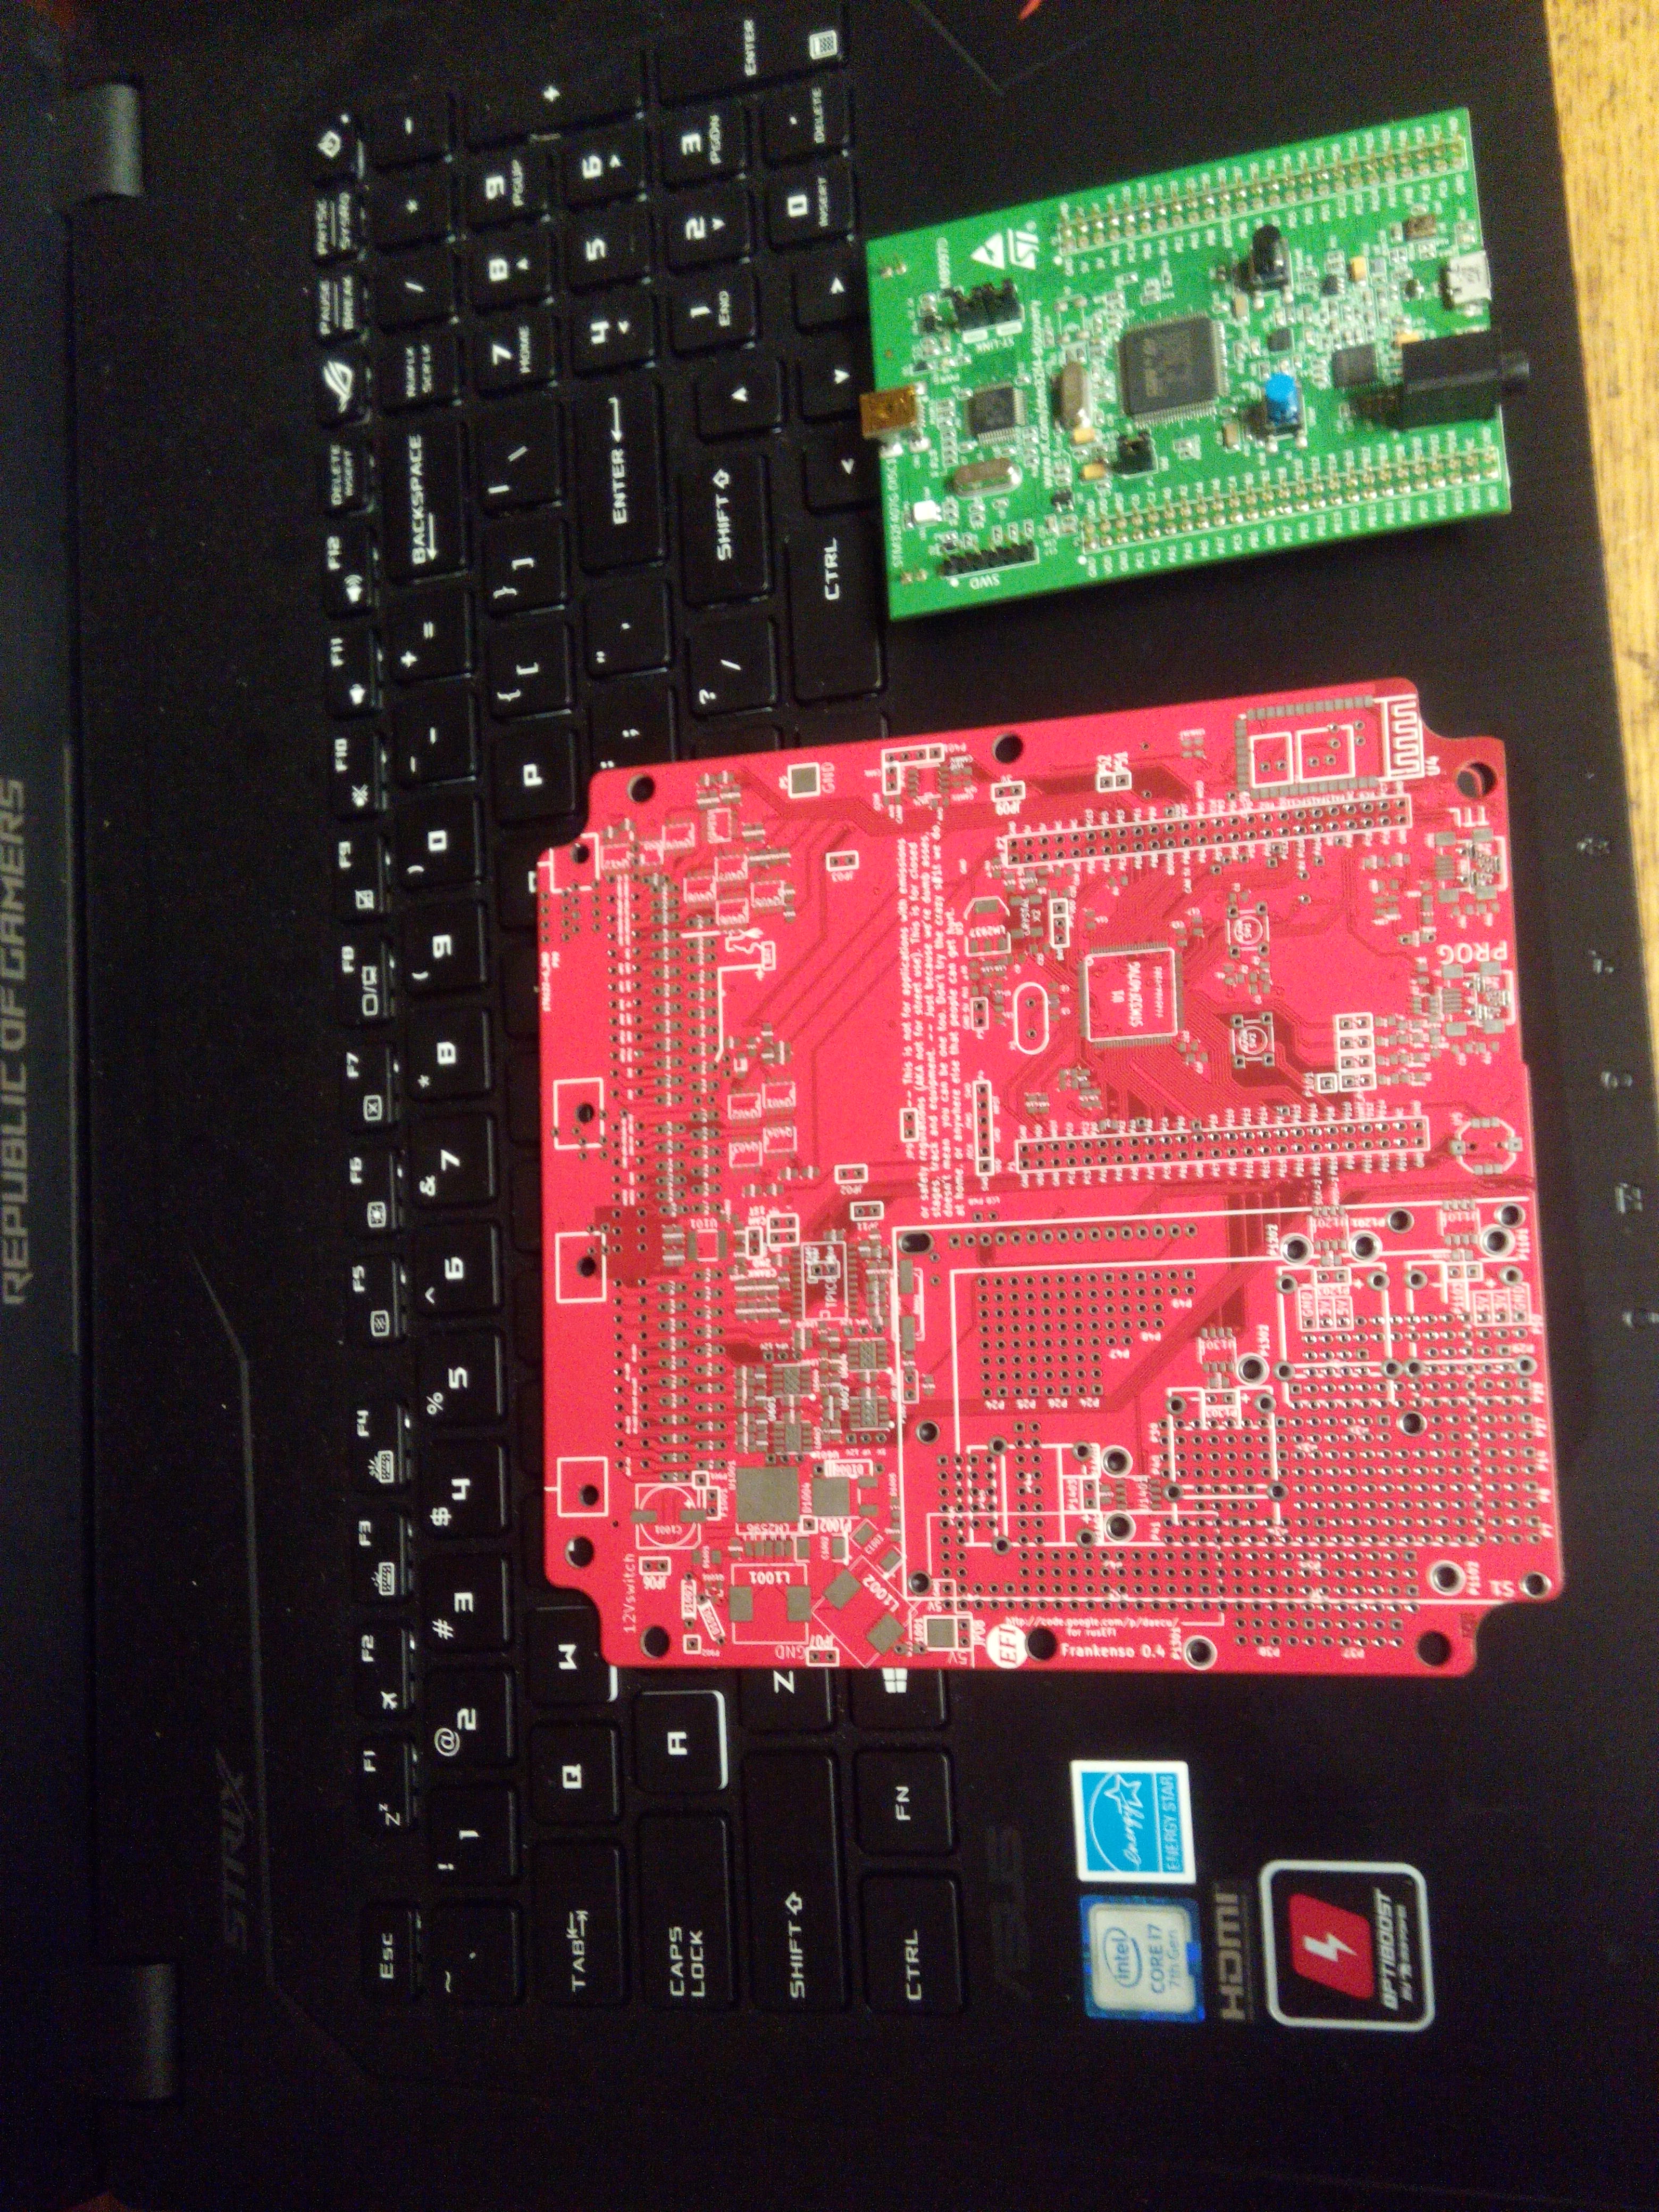 first thing in order, ditch the discovery eval board, I wasn't at first, but hell I can use parts off of it